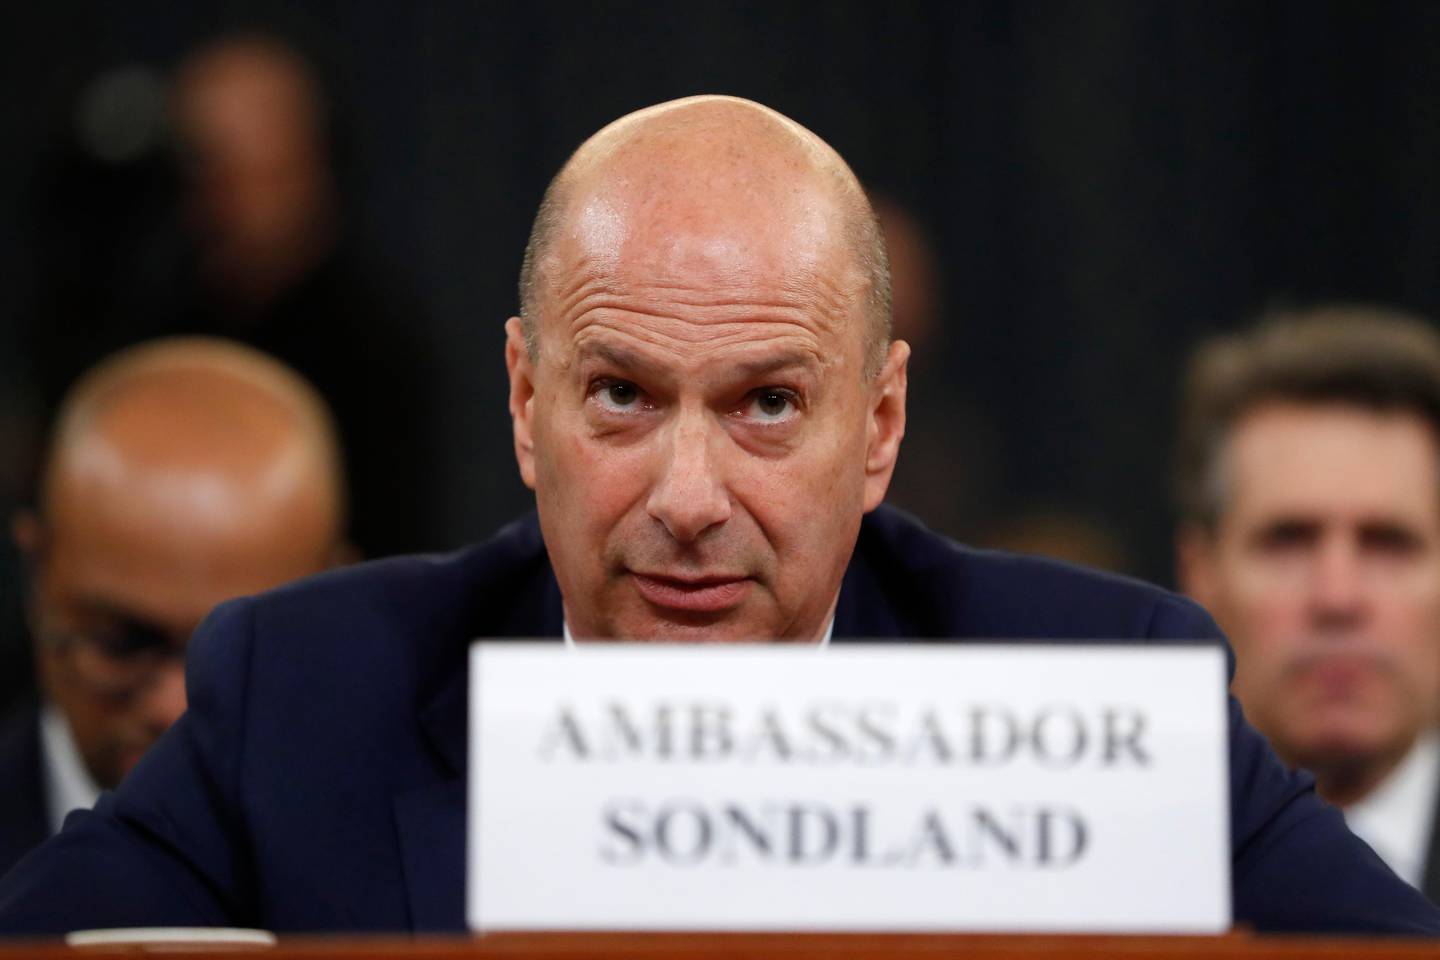 U.S. Ambassador to the European Union Gordon Sondland listens to the closing statement of House Intelligence Committee Chairman Adam Schiff, D-Calif., before the House Intelligence Committee on Capitol Hill in Washington, Wednesday, Nov. 20, 2019, during a public impeachment hearing of President Donald Trump's efforts to tie U.S. aid for Ukraine to investigations of his political opponents. (AP Photo/Andrew Harnik)